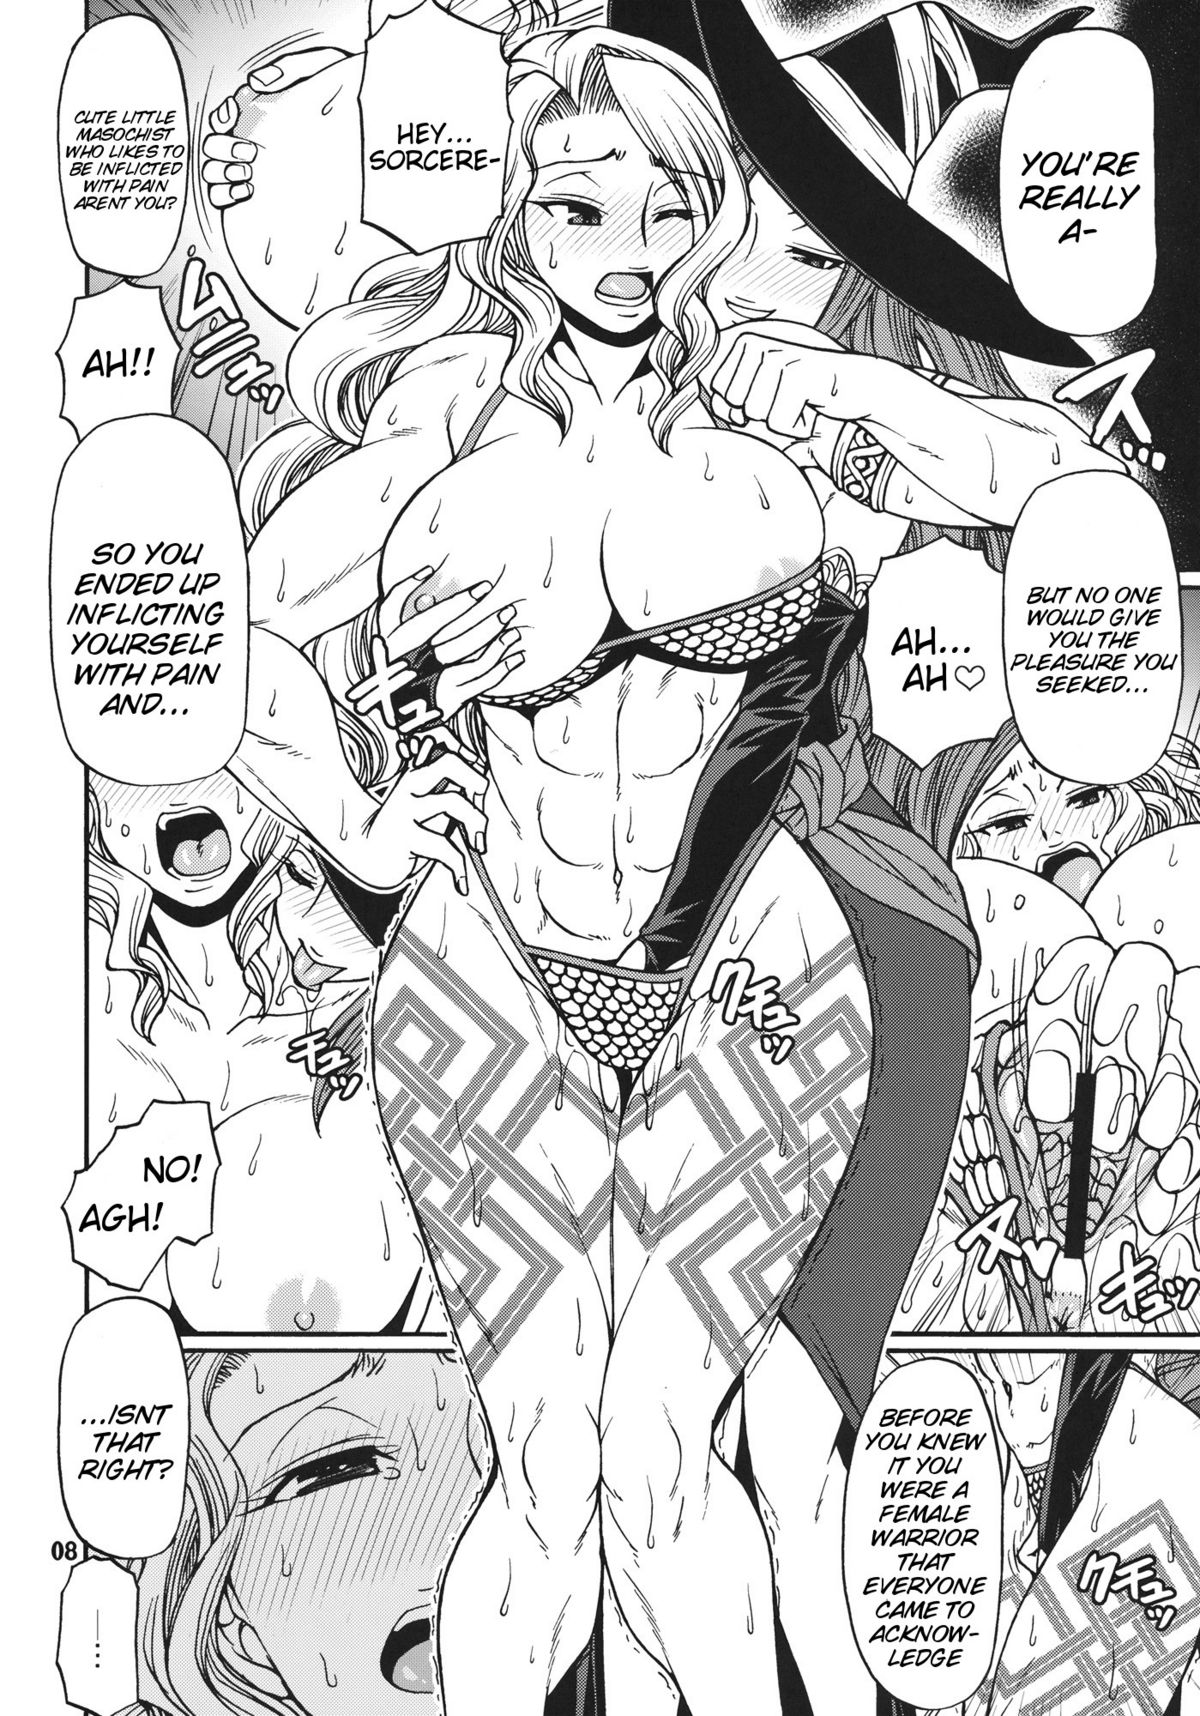 (C80) [CELLULOID-ACME (Chiba Toshirou)] PARTY HARD (Dragon's Crown) [English] [doujin-moe.us] page 7 full